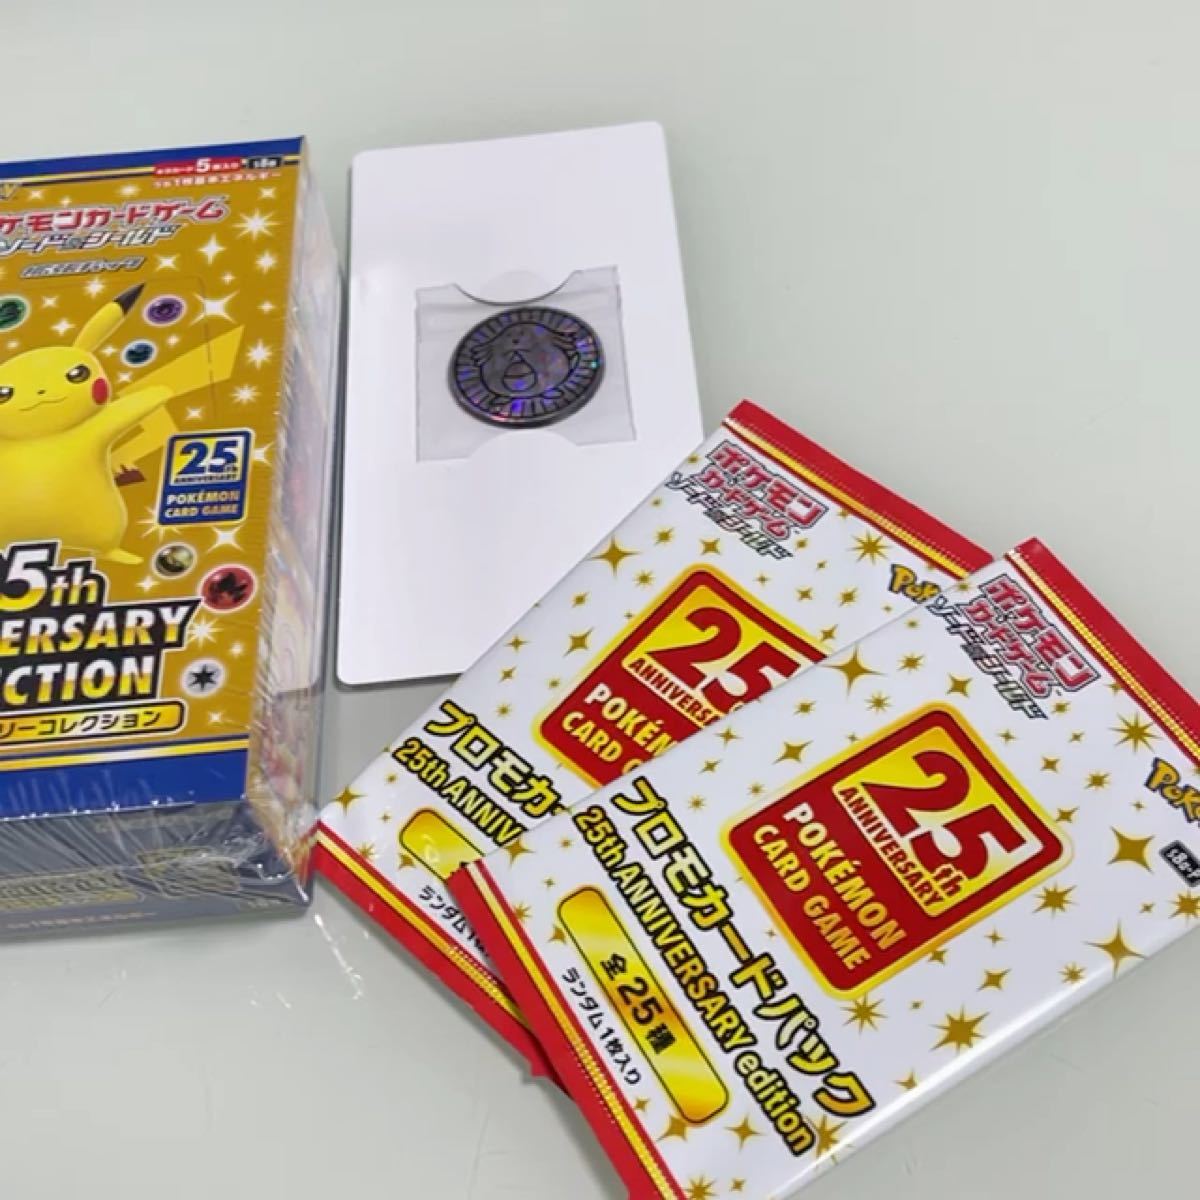 25th anniversary collection of Pokemon card games with promo coins